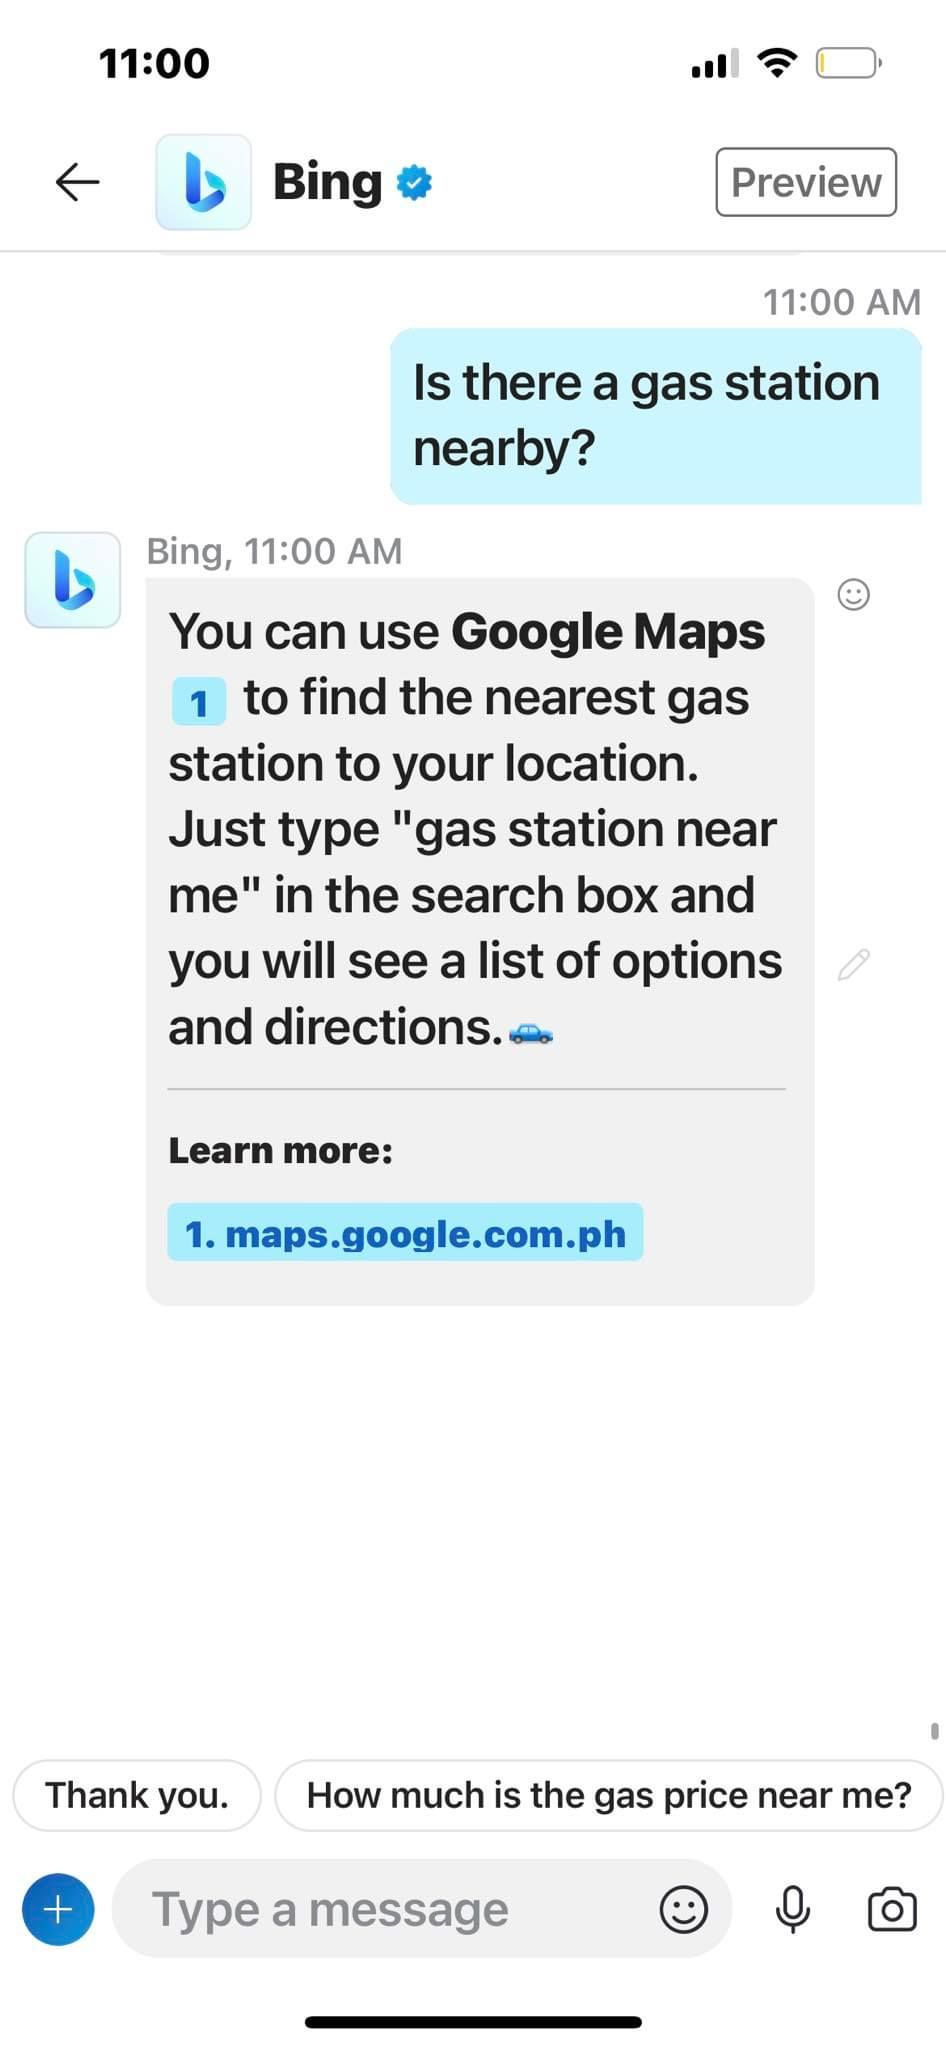 Bing AI Can't Detect Nearby Gas Stations